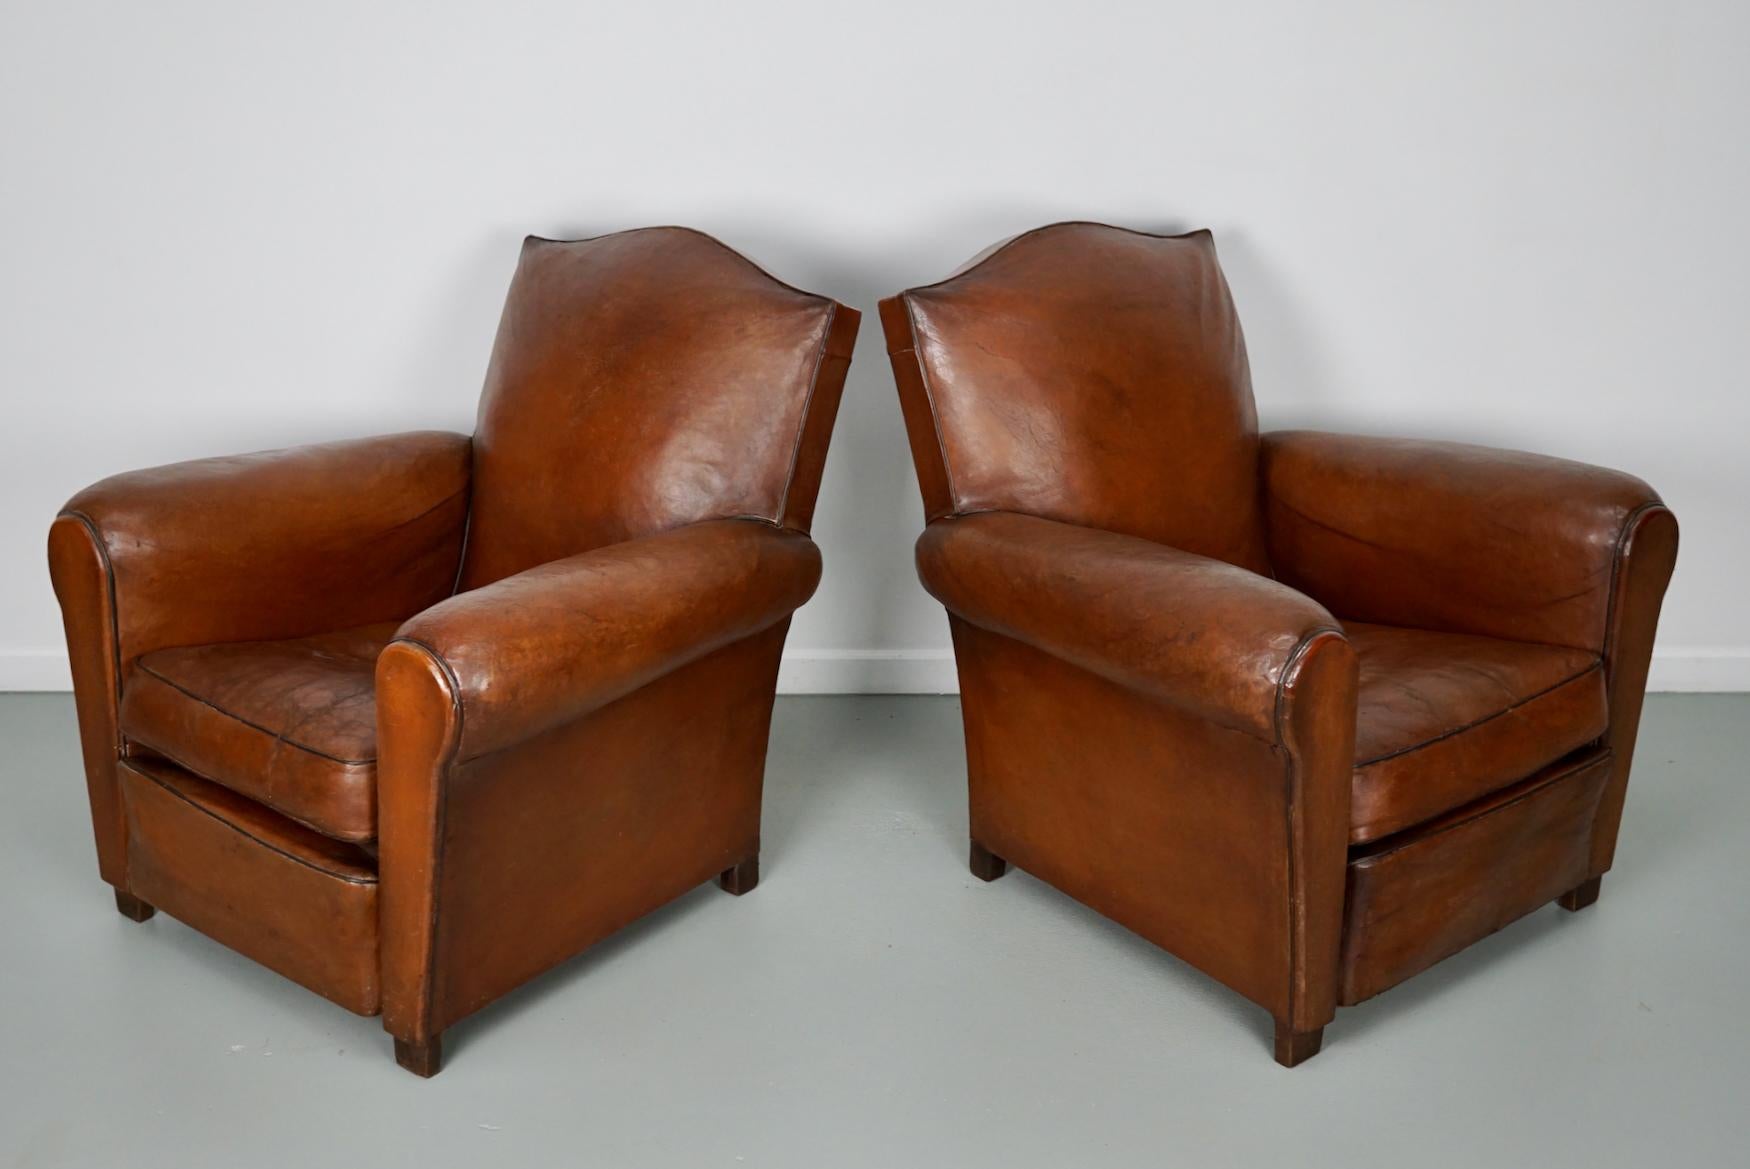 Pair of French Cognac Moustache Back Leather Club Chairs, 1940s For Sale 4